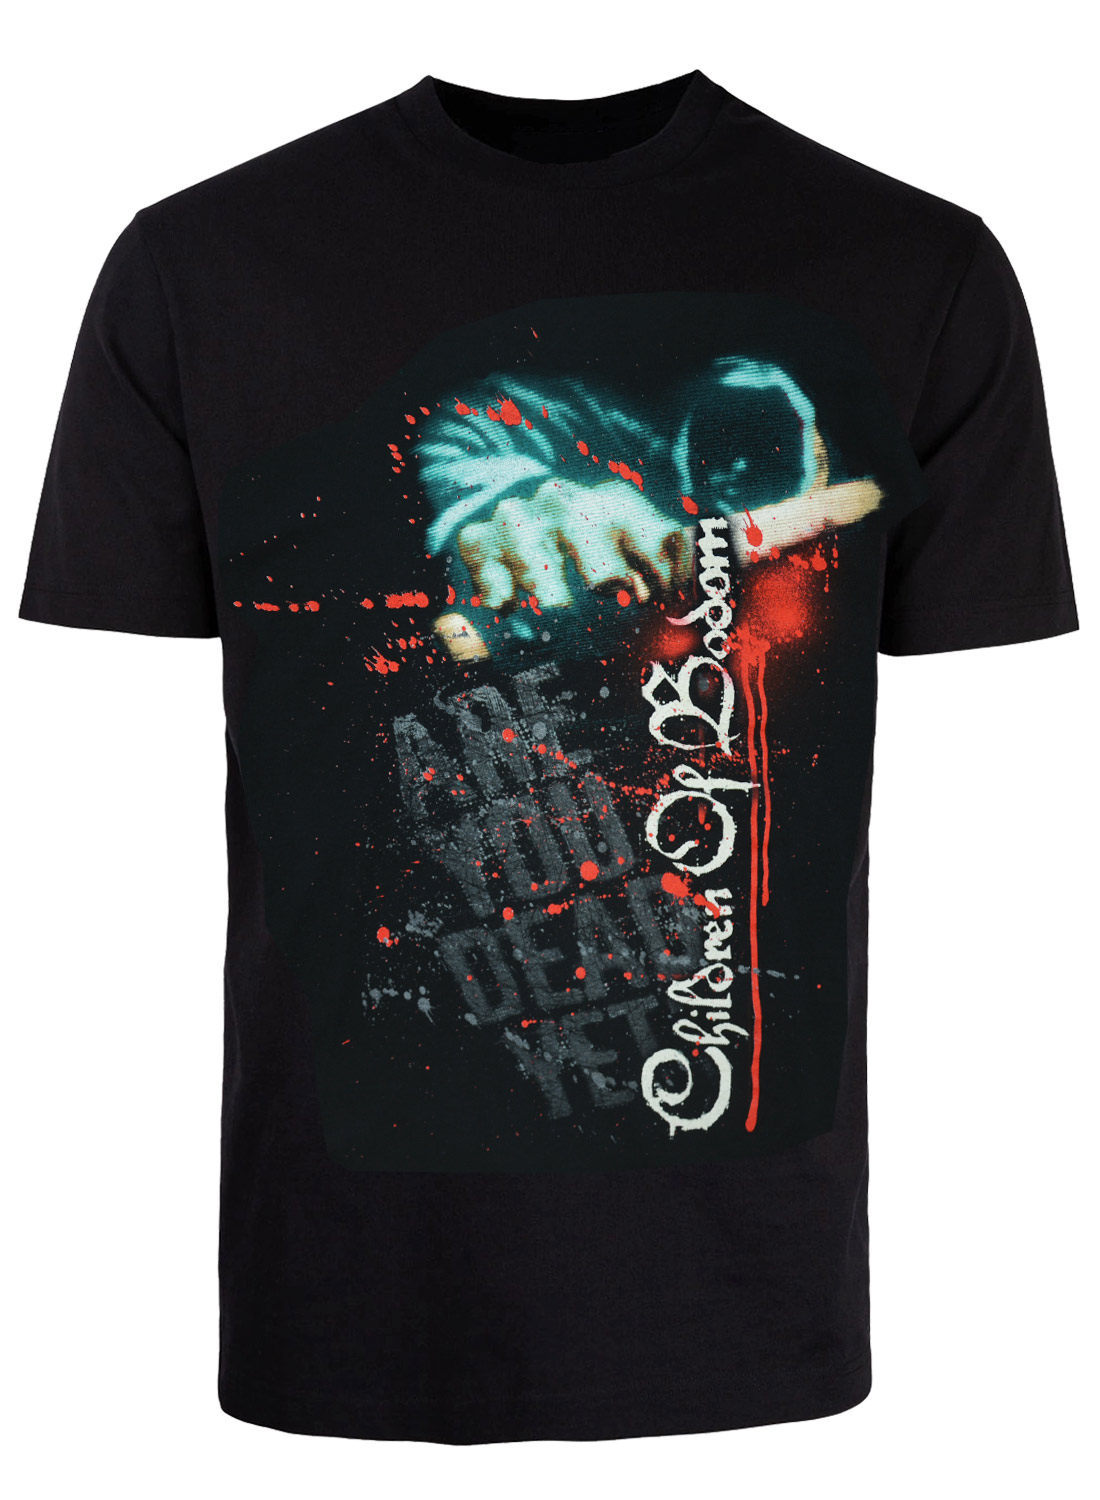 Children of Bodom Are you dead yet T-shirt